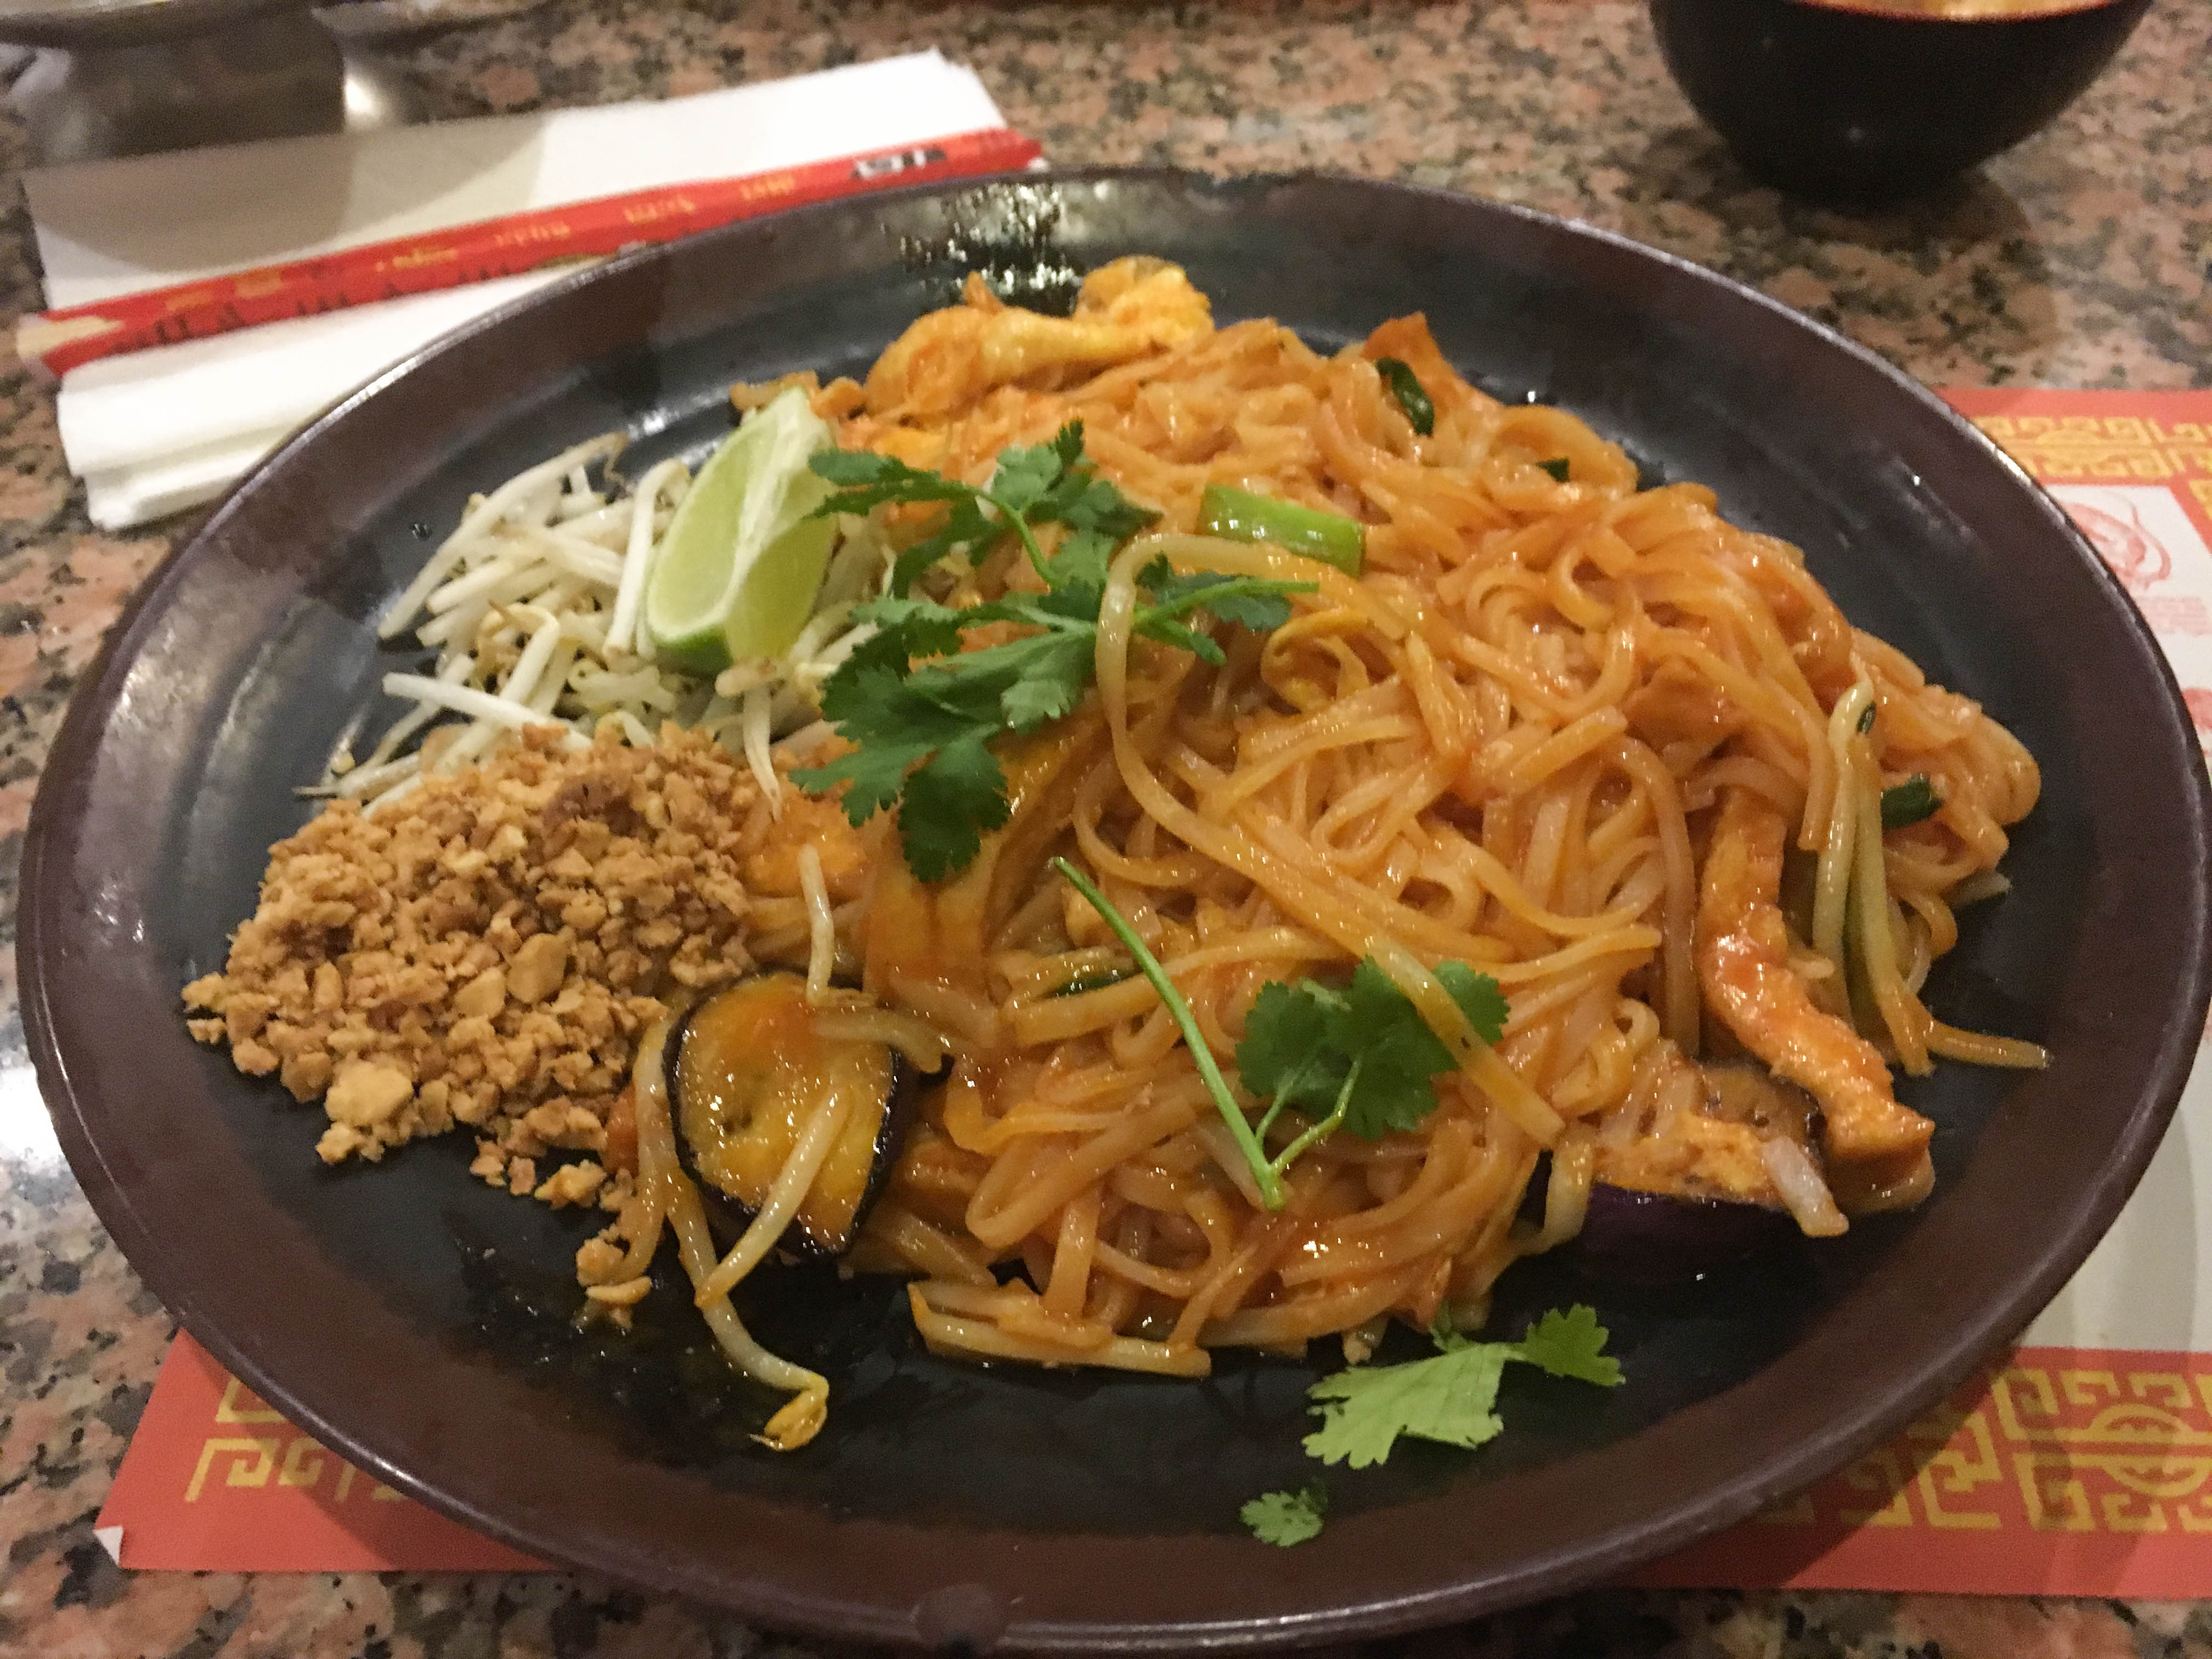 Eggplant a welcome surprise in restaurant’s Pad Thai dish